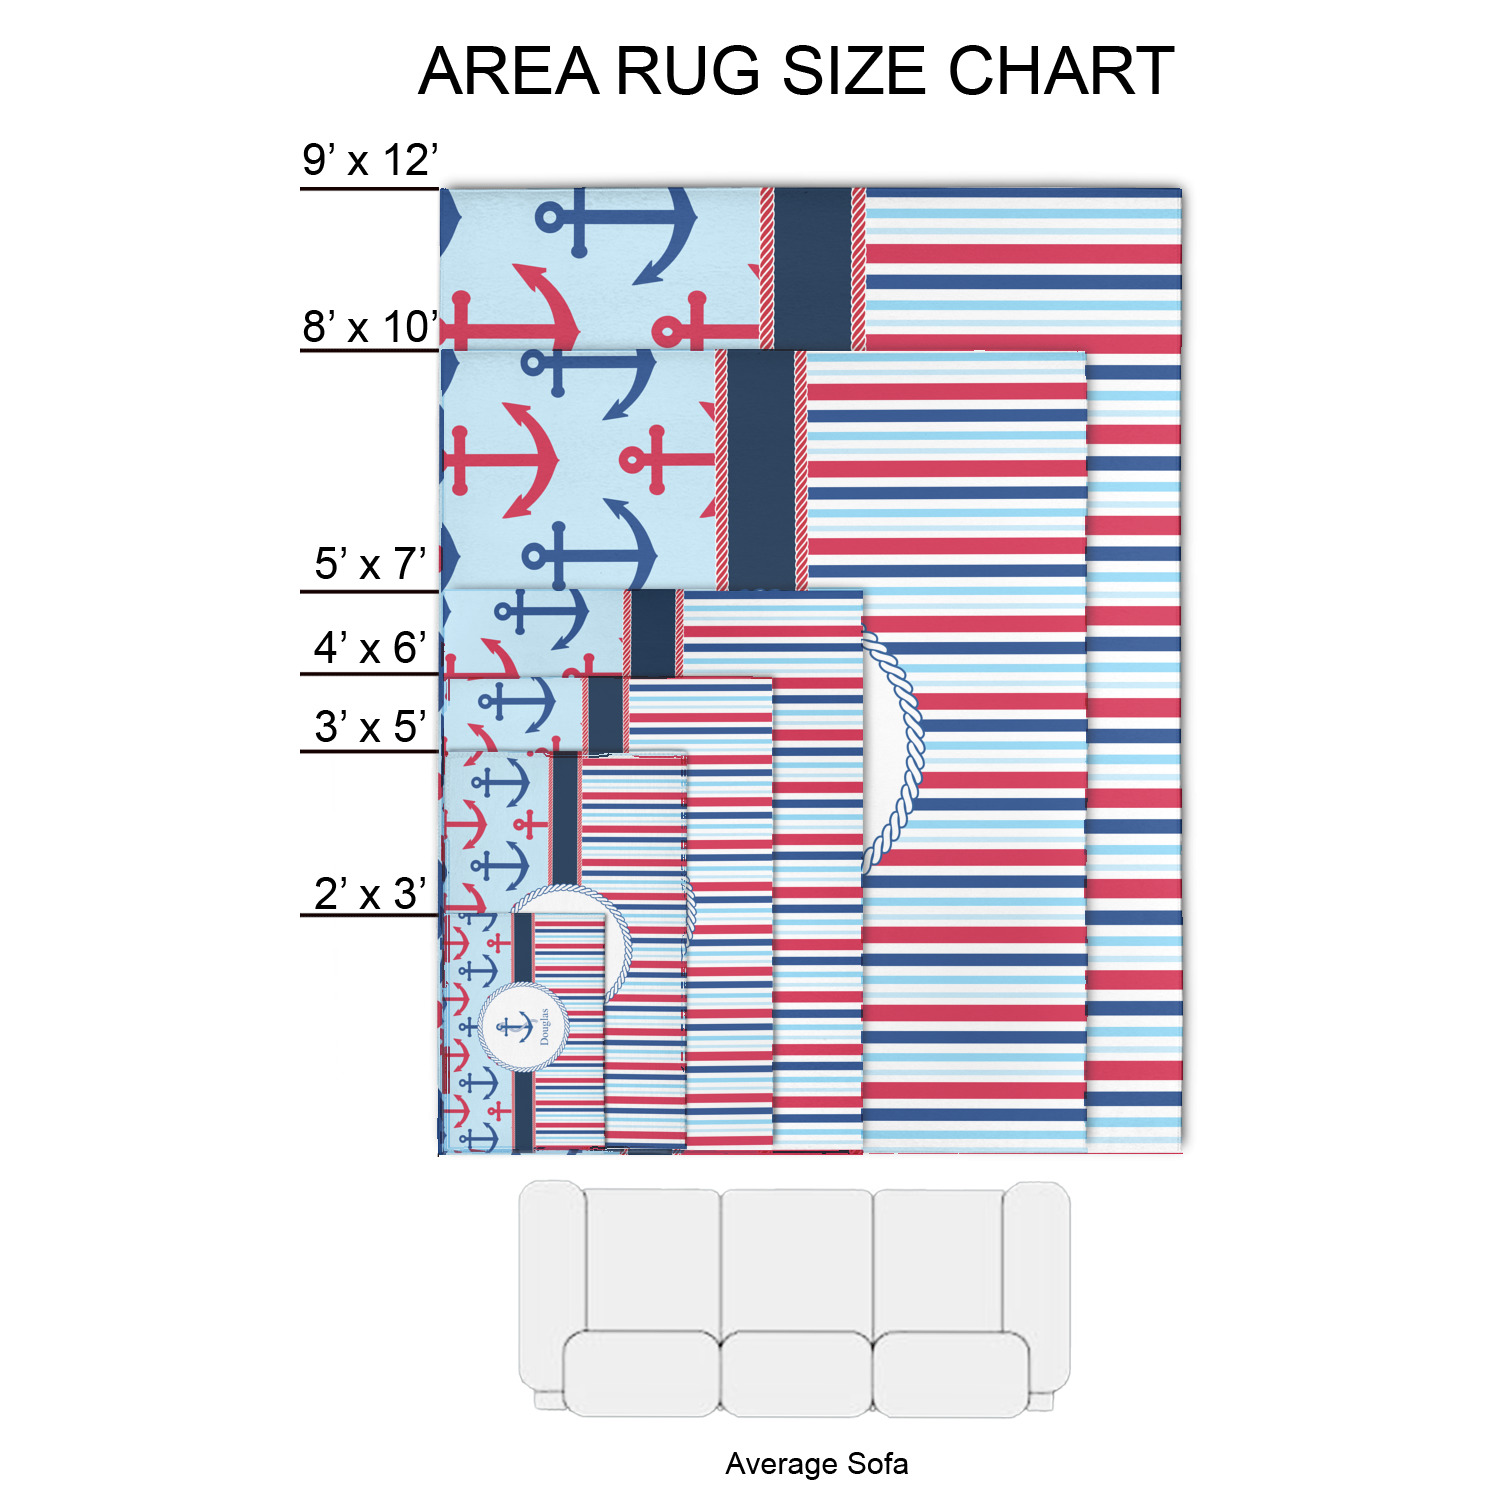 https://www.youcustomizeit.com/common/MAKE/216719/Anchors-Stripes-2-x3-Indoor-Area-Rugs-Size-Chart.jpg?lm=1645748375